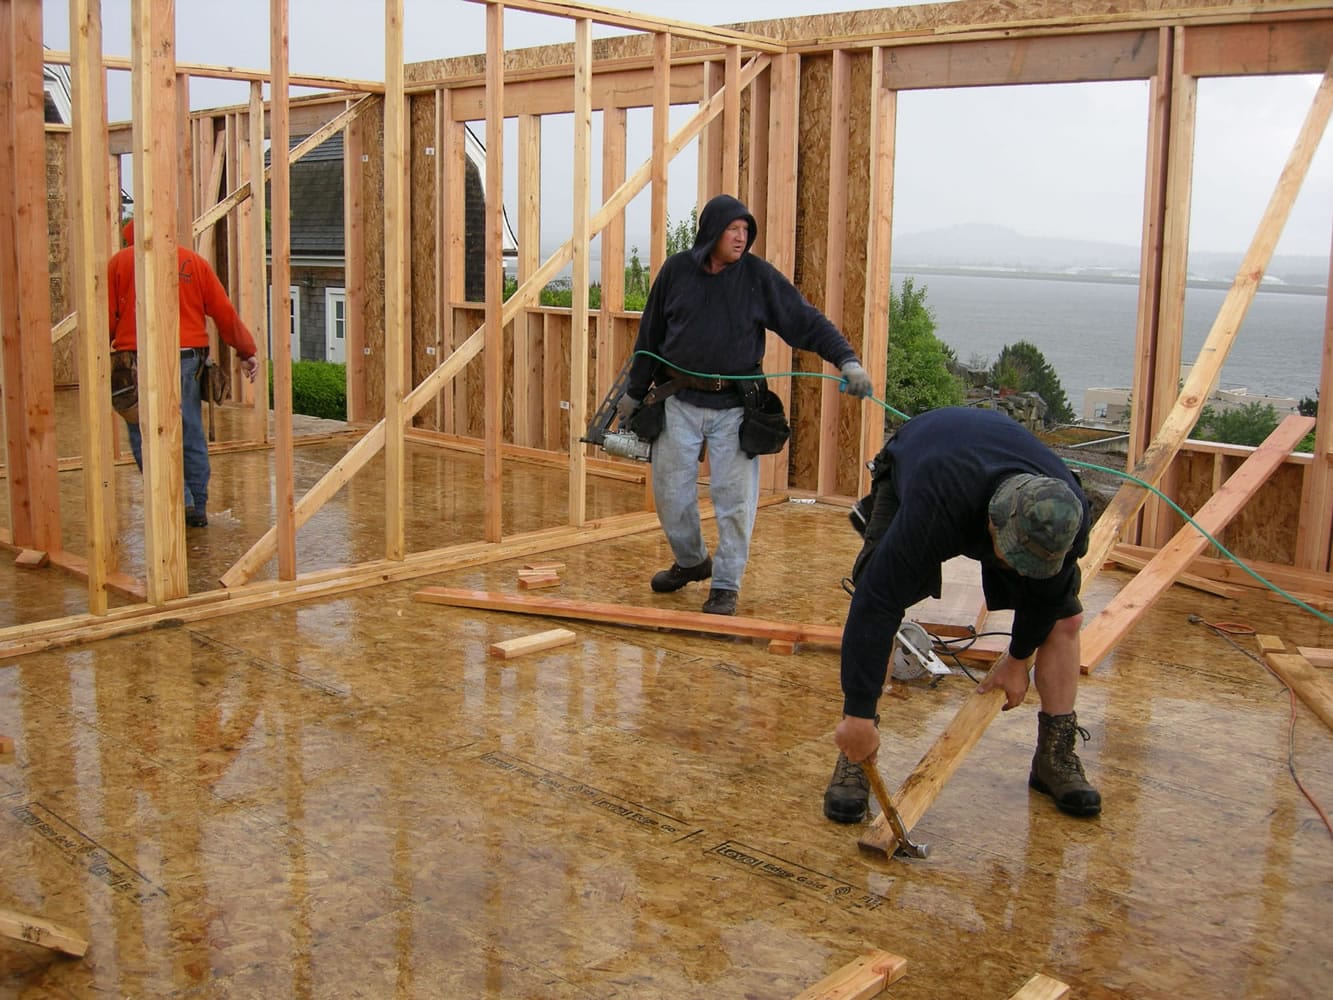 A construction crew frames a $1.8 million Colonial-style house, one of four to be showcased in September in the 2012 Clark County Parade of Homes at the Evergreen Pointe subdivision overlooking the Columbia River in Vancouver.